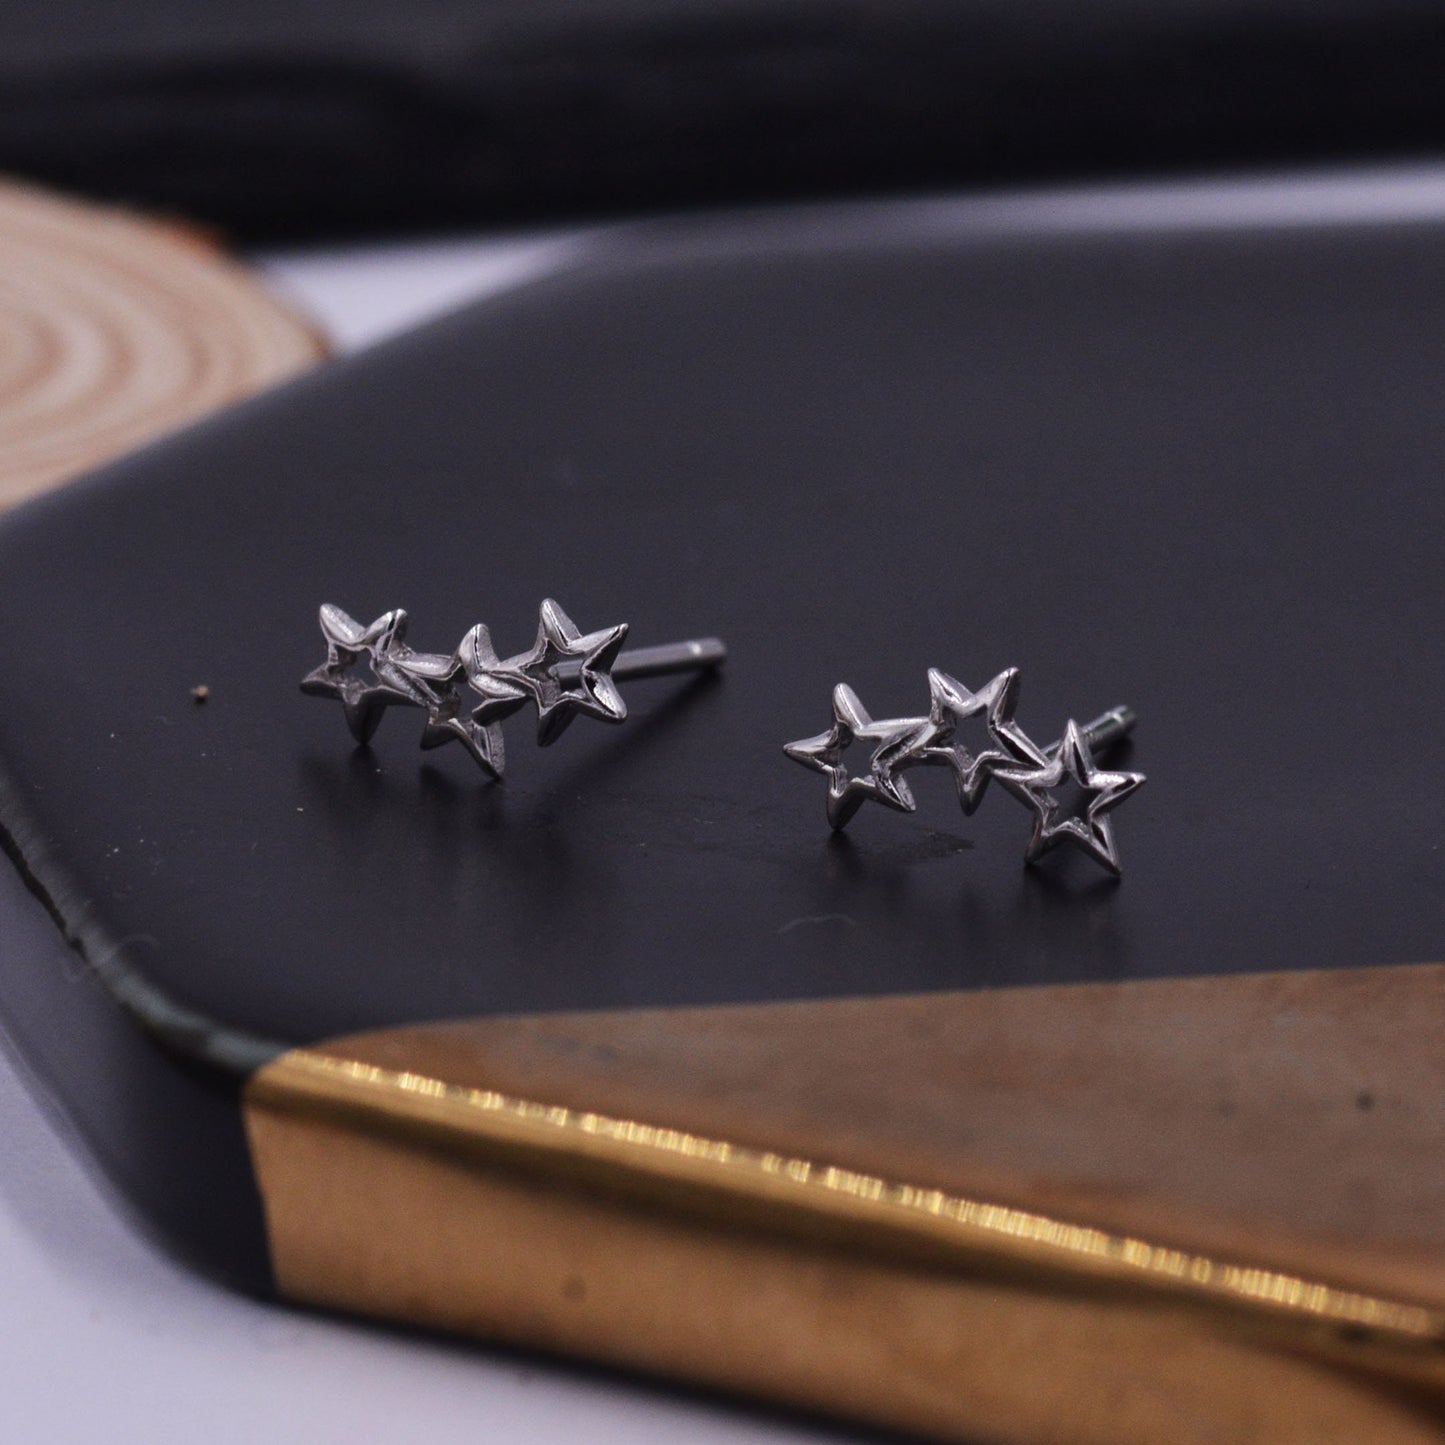 Tiny Open Star Trio Stud Earrings in Sterling Silver, Celestial Jewellery with Star Motif, Delicate and Stylish